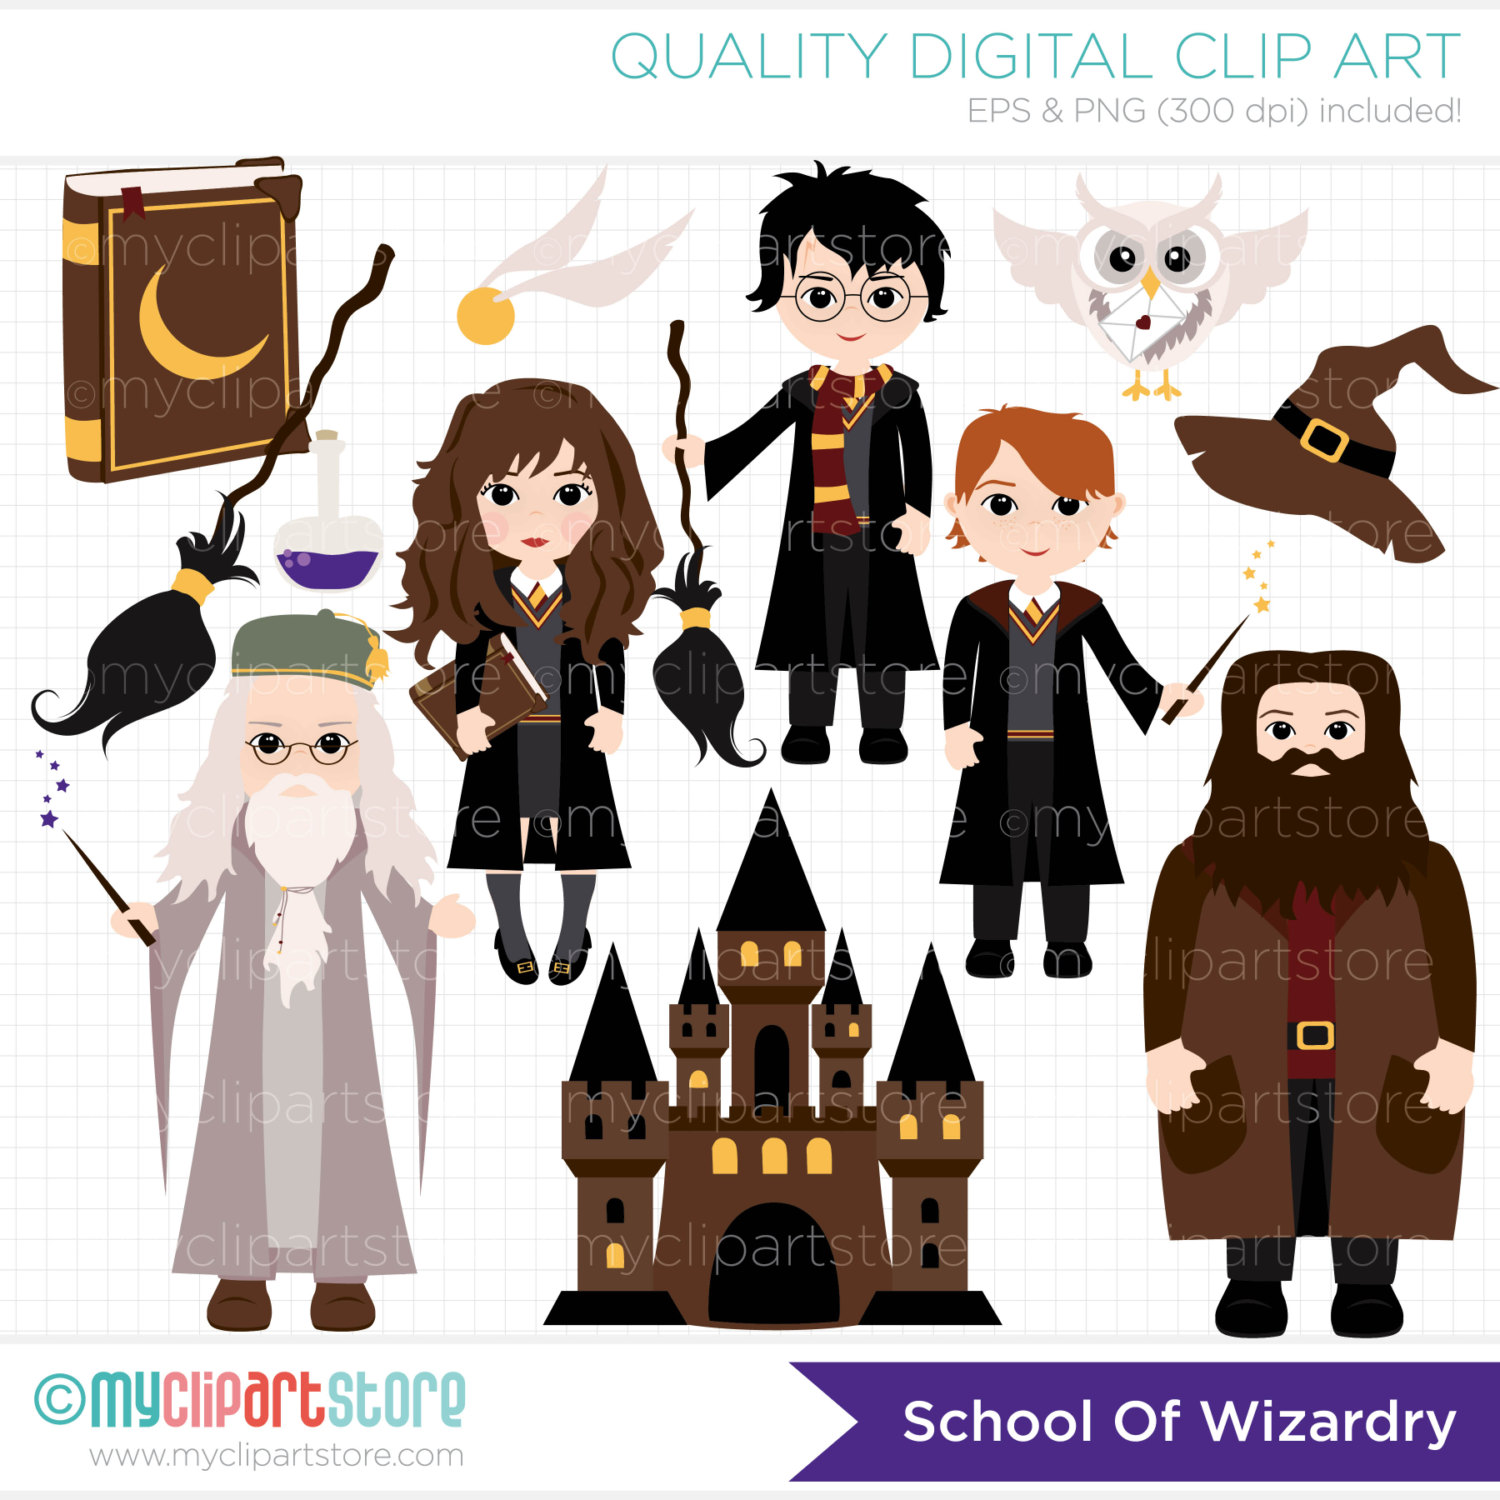 Hogwarts Castle clipart #14, Download drawings